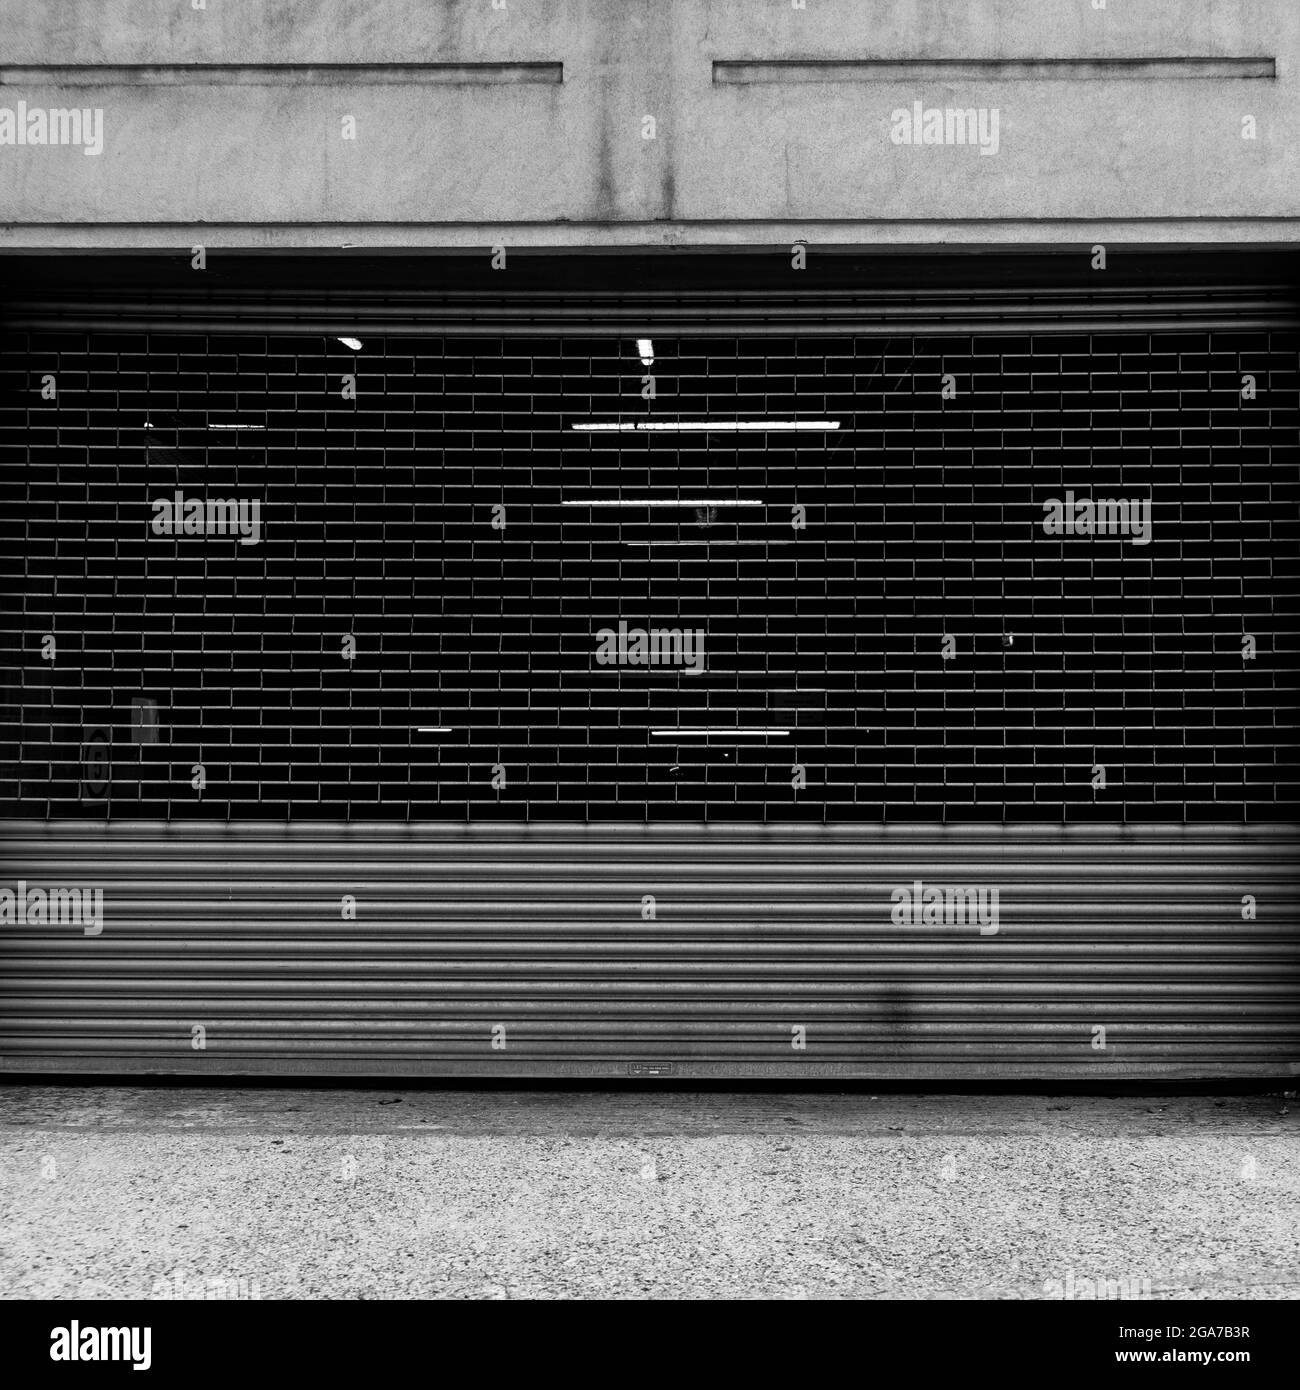 Kingston Surrey London, giugno 2021, chiuso Steel Security Garage Parking Shutters with No People in Black and White Foto Stock